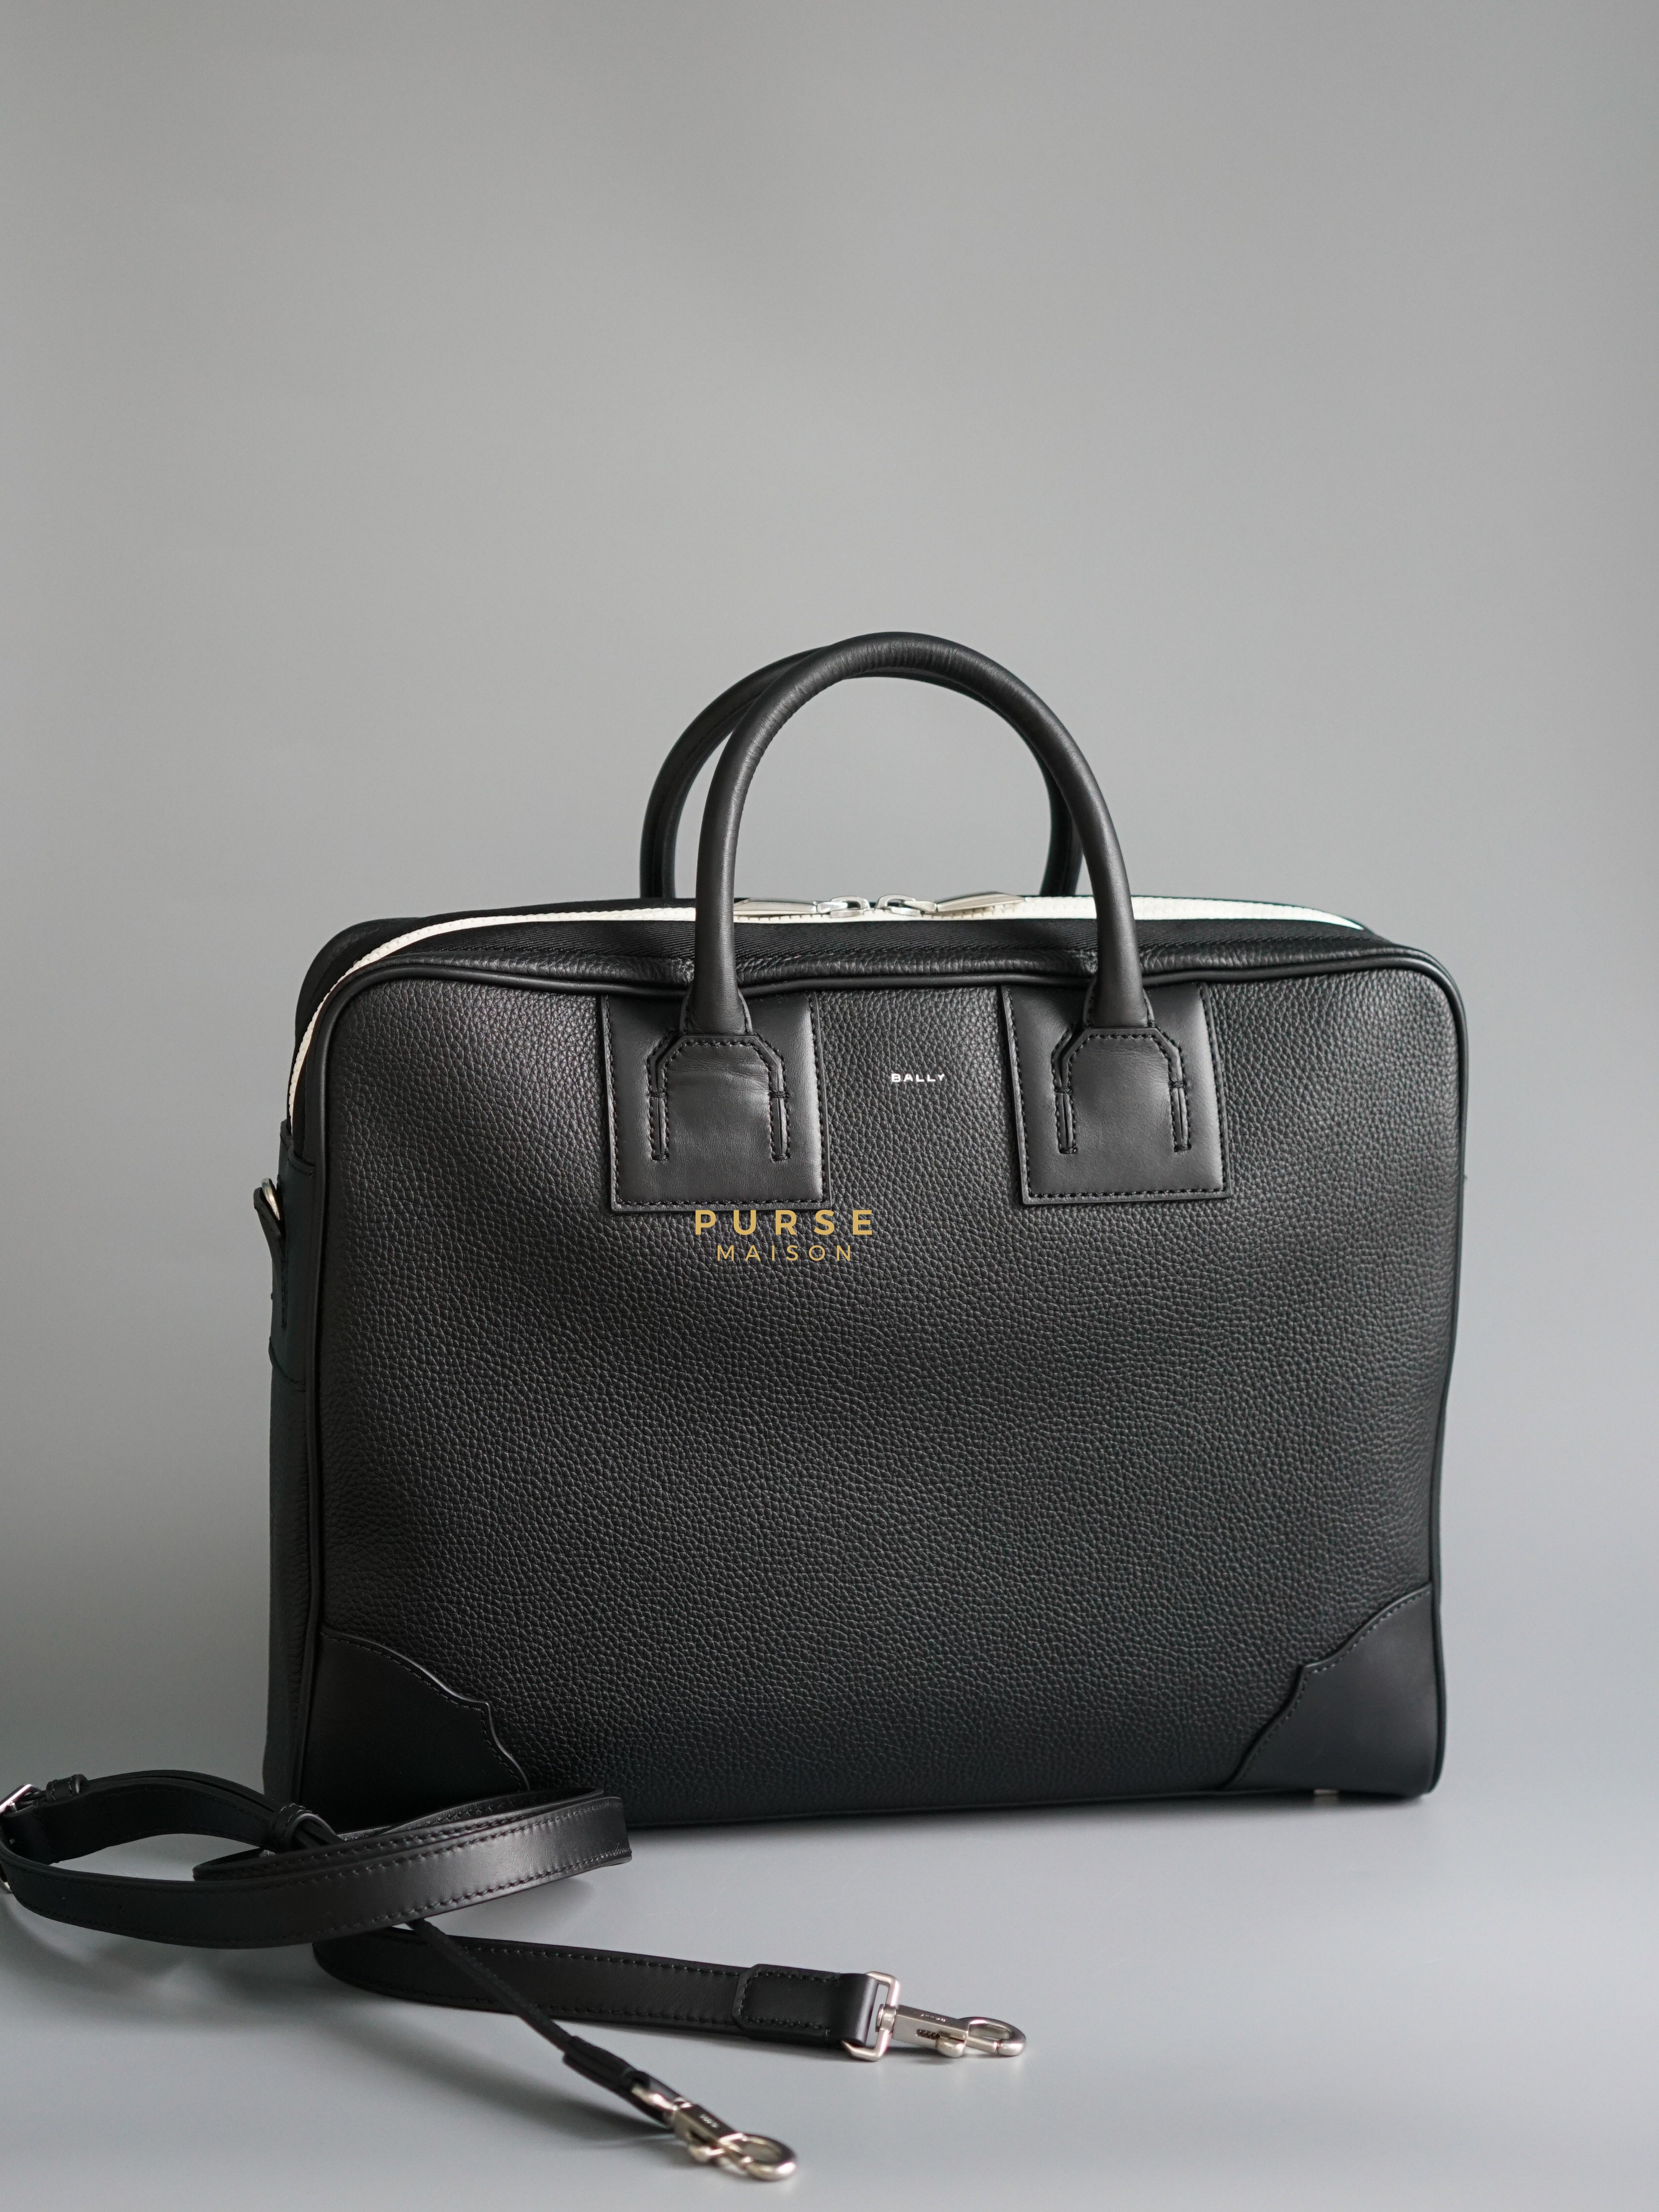 Bally Men’s Briefcase Black in Grained Leather | Purse Maison Luxury Bags Shop